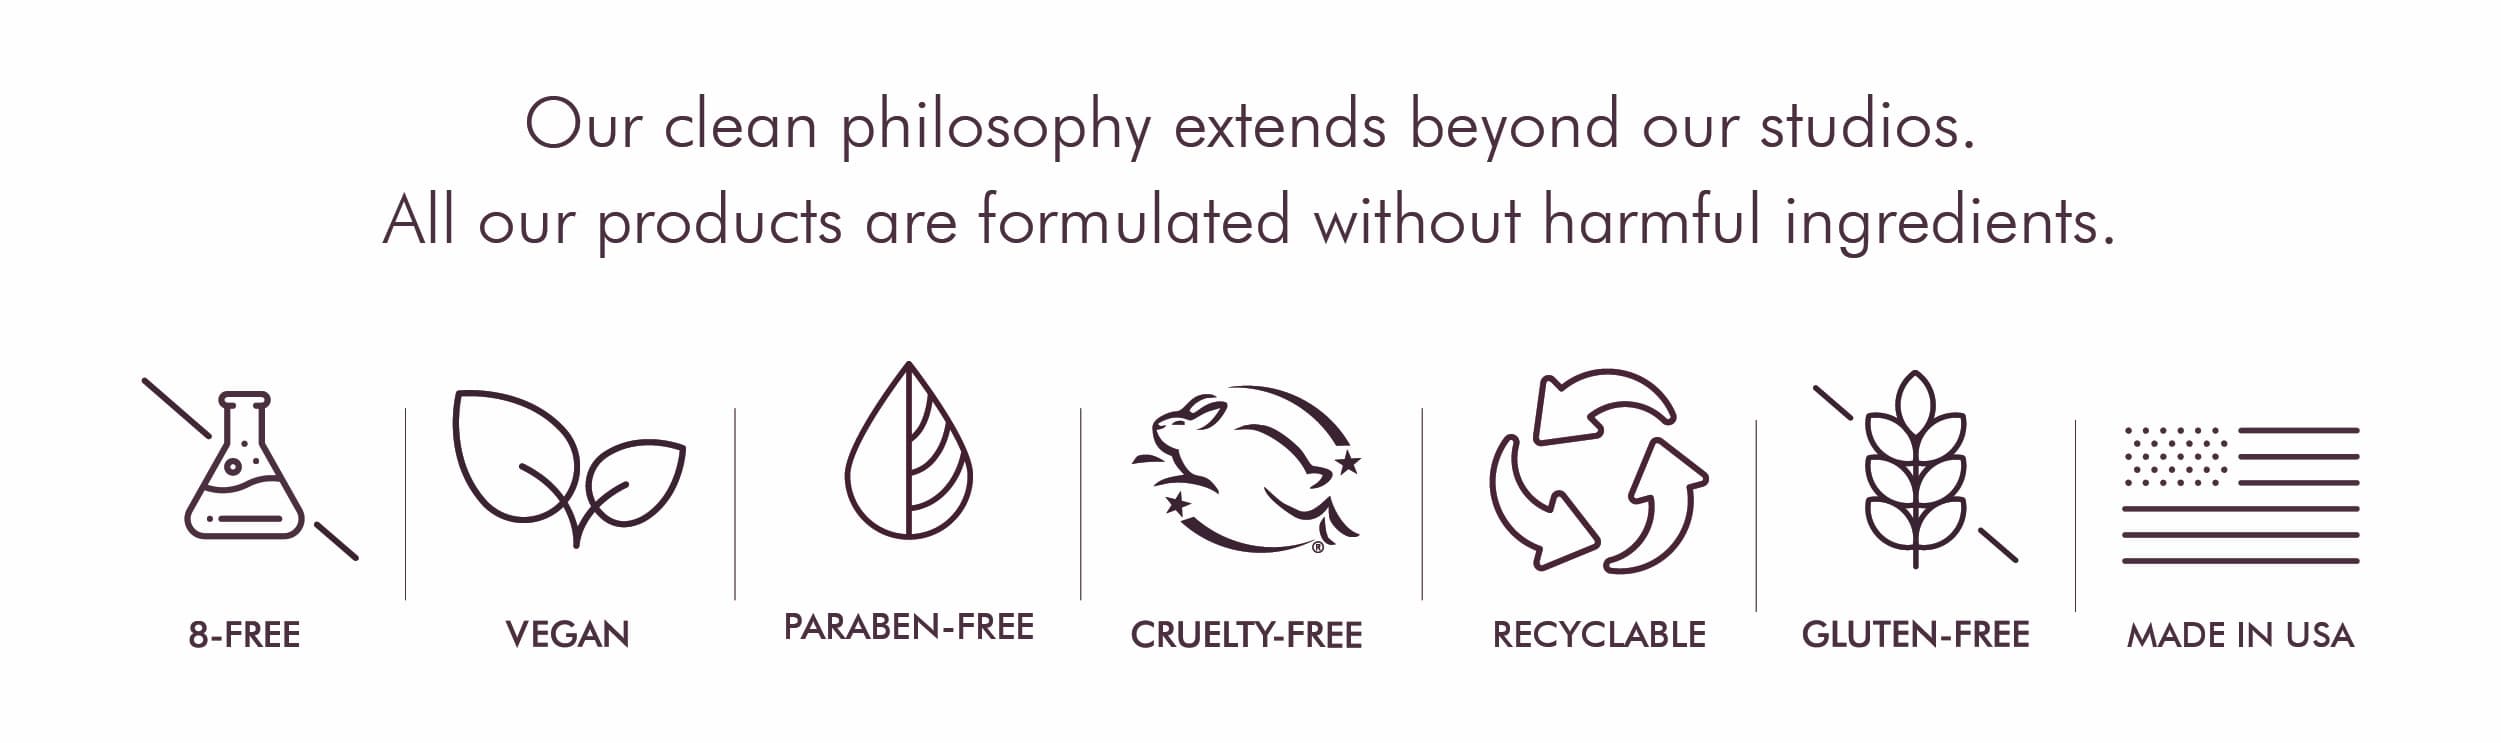 Our clean philosophy extends beyond our studios. All our products are formulated without harmful ingredients.